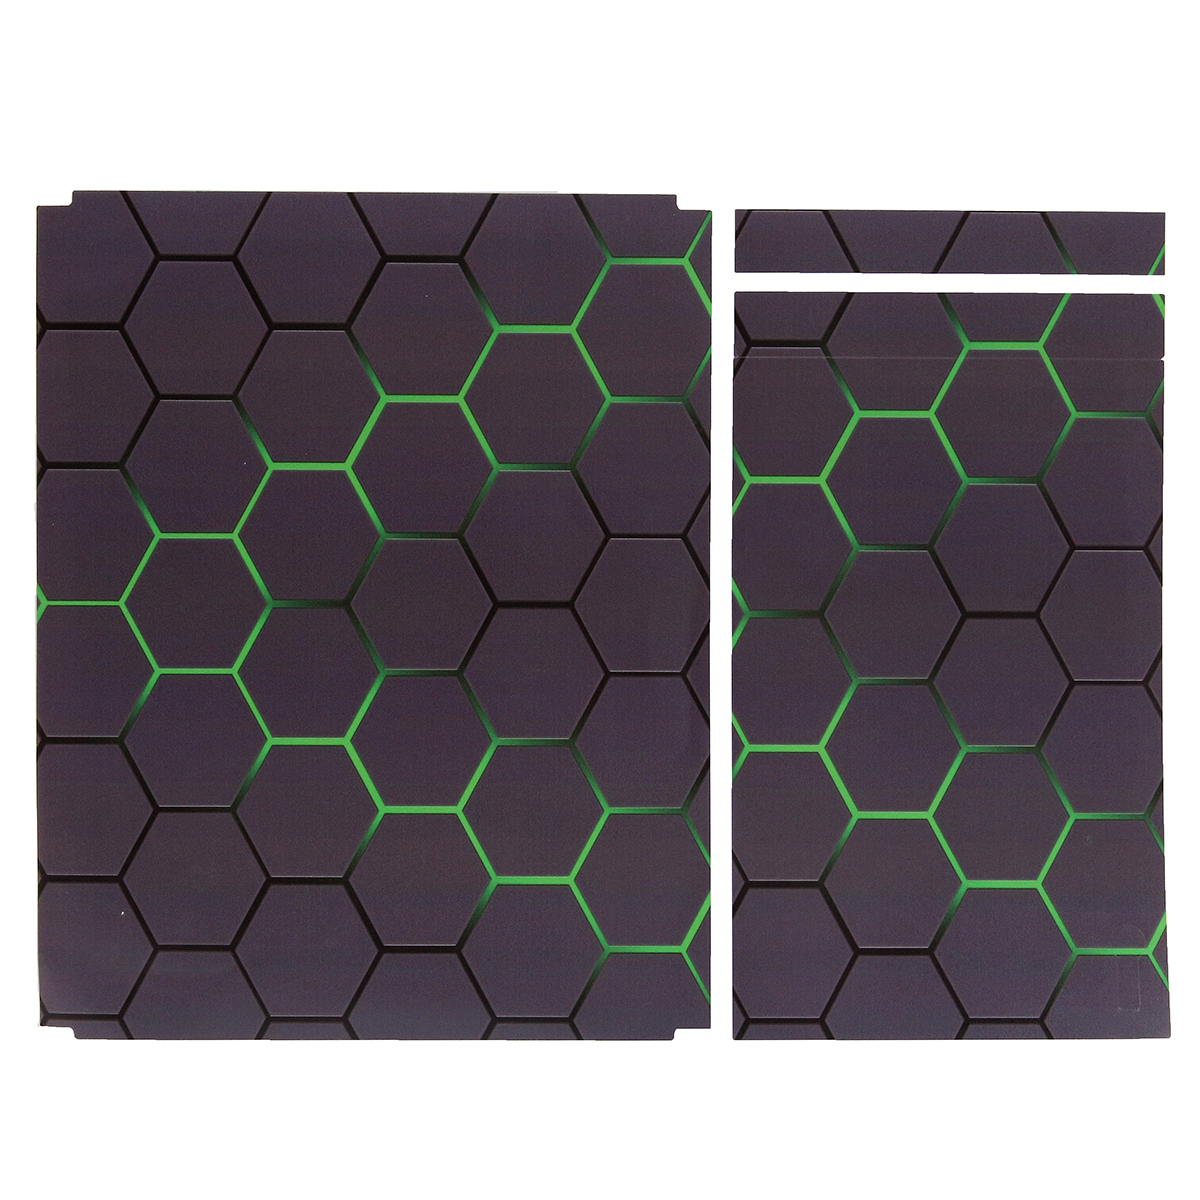 Green Grid Vinyl Decal Skin Stickers Cover for Xbox One S Game Console&2 Controllers 34